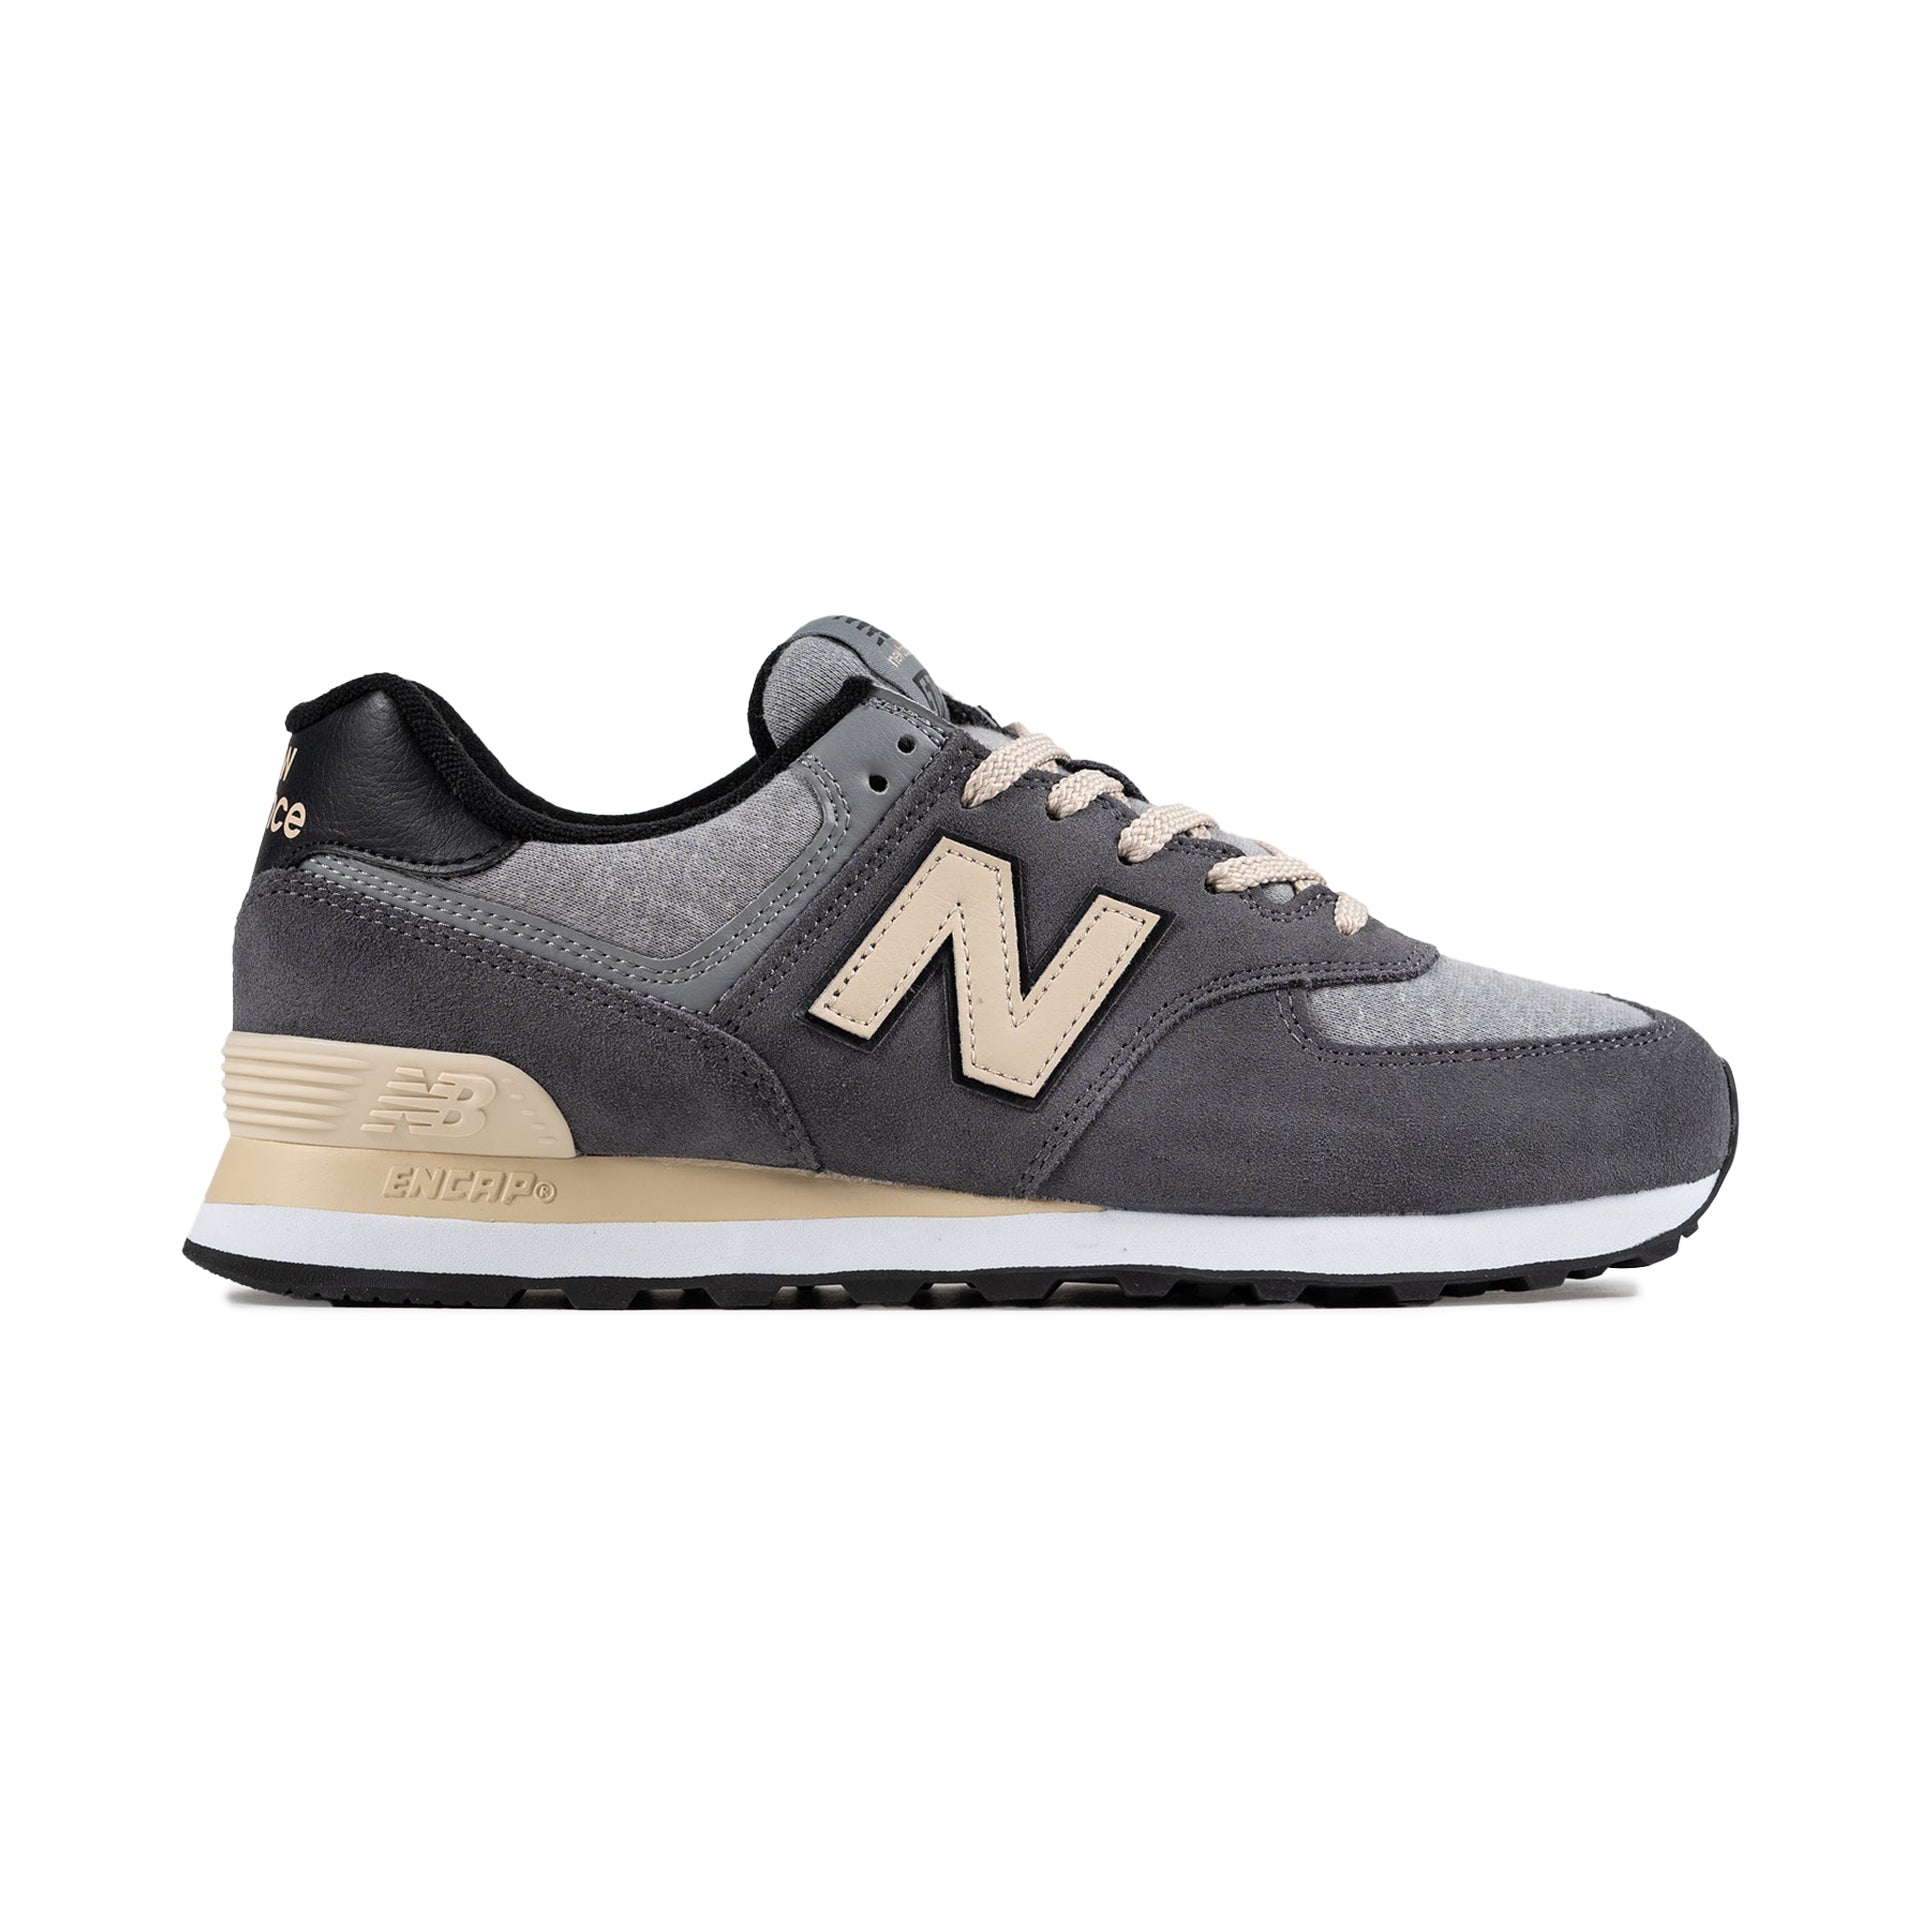 New Balance | Uncrate Supply